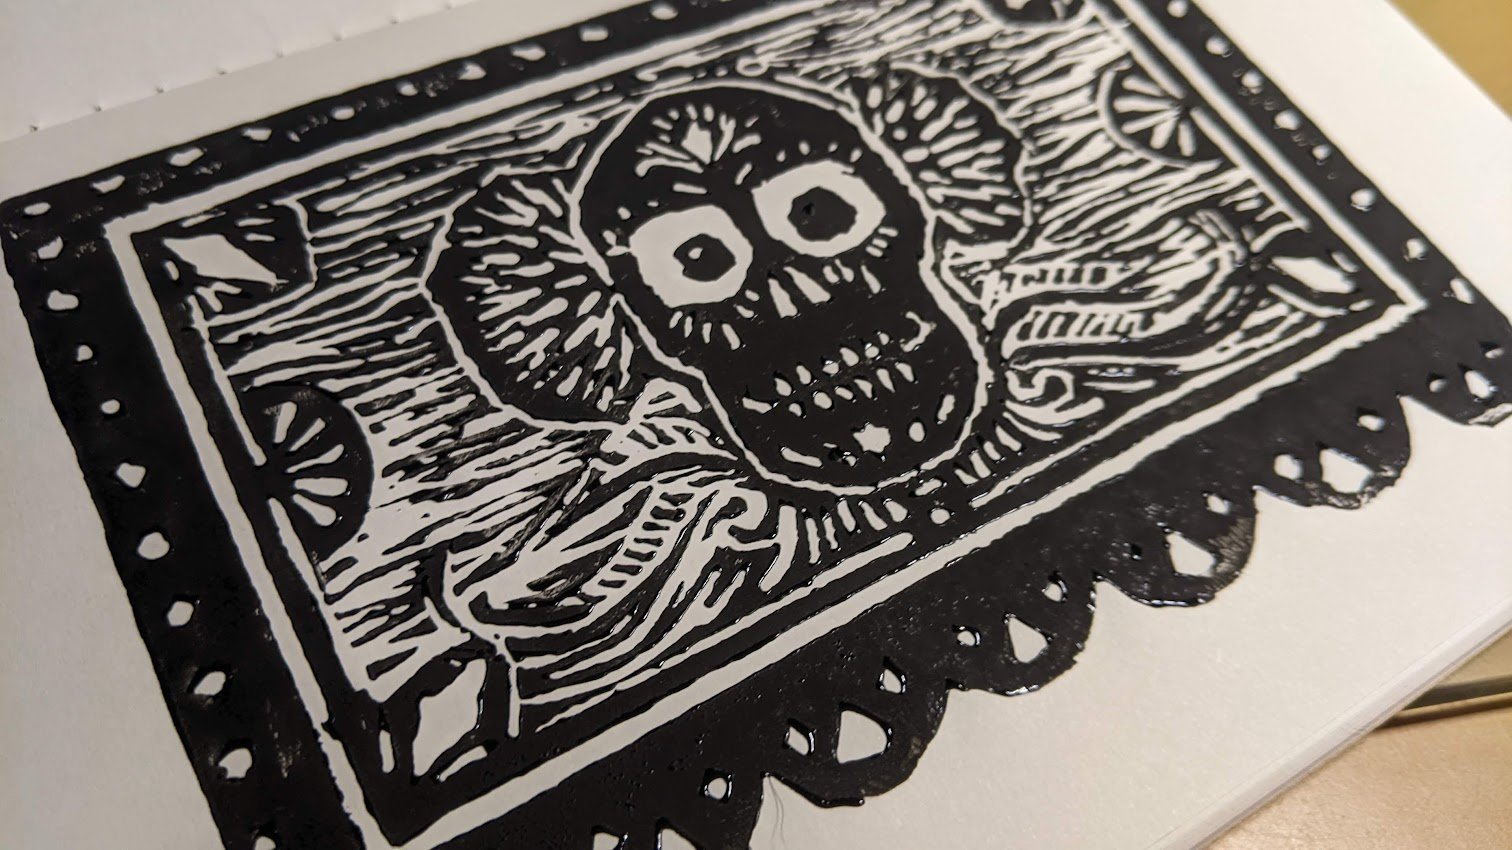 Finished a papel picado inspired linocut block for a print